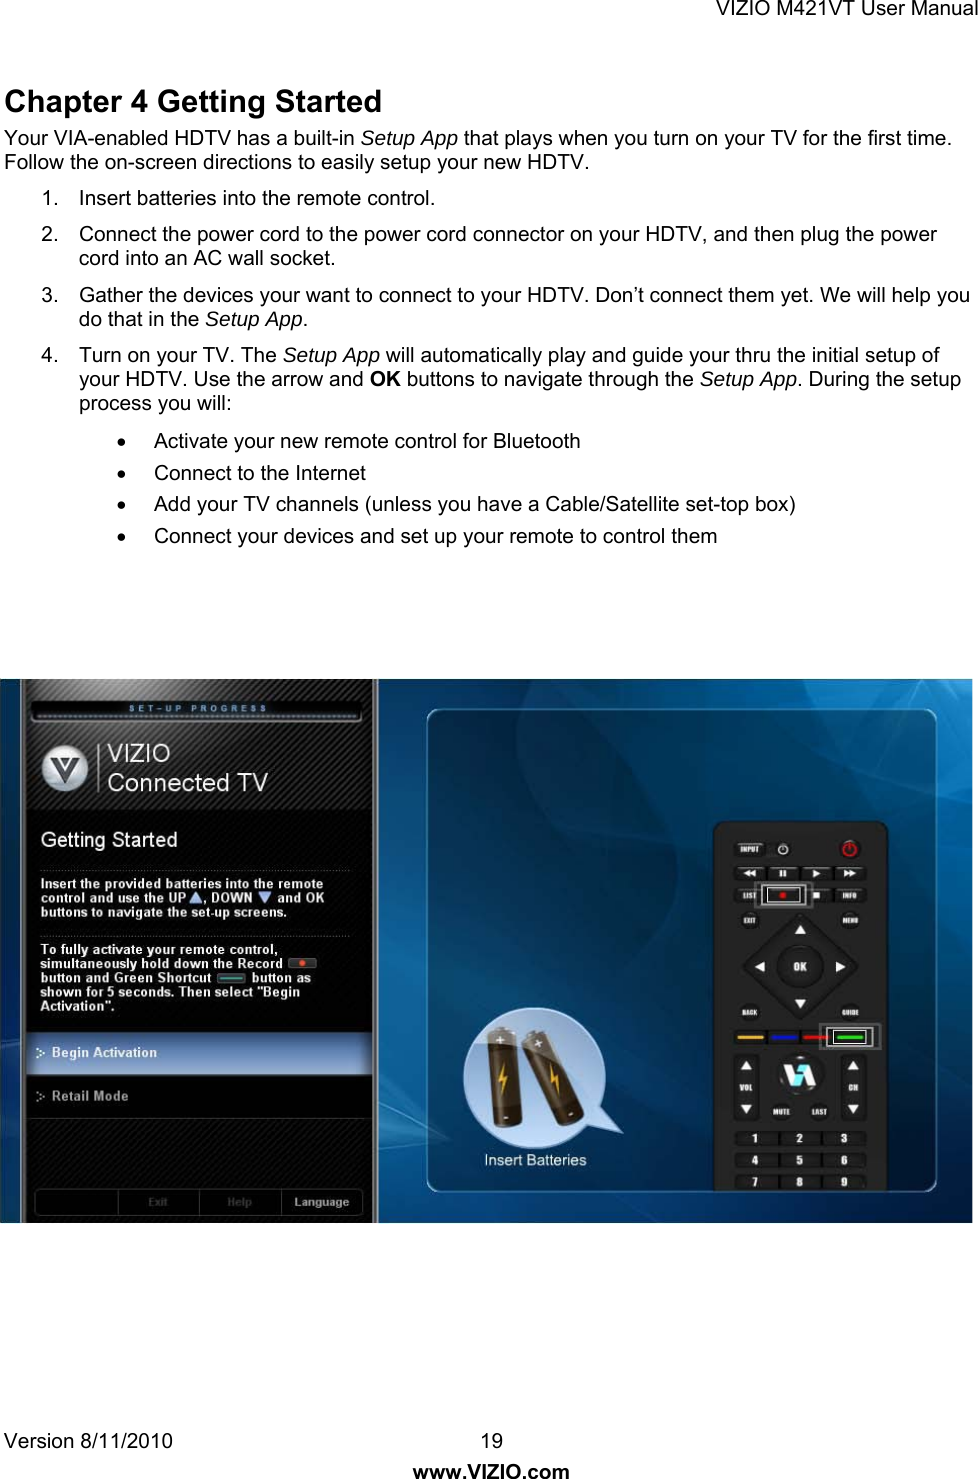 VIZIO M421VT User Manual Version 8/11/2010  19   www.VIZIO.com Chapter 4 Getting Started   Your VIA-enabled HDTV has a built-in Setup App that plays when you turn on your TV for the first time. Follow the on-screen directions to easily setup your new HDTV. 1.  Insert batteries into the remote control. 2.  Connect the power cord to the power cord connector on your HDTV, and then plug the power cord into an AC wall socket. 3.  Gather the devices your want to connect to your HDTV. Don’t connect them yet. We will help you do that in the Setup App. 4.  Turn on your TV. The Setup App will automatically play and guide your thru the initial setup of your HDTV. Use the arrow and OK buttons to navigate through the Setup App. During the setup process you will:  •  Activate your new remote control for Bluetooth •  Connect to the Internet •  Add your TV channels (unless you have a Cable/Satellite set-top box) •  Connect your devices and set up your remote to control them  